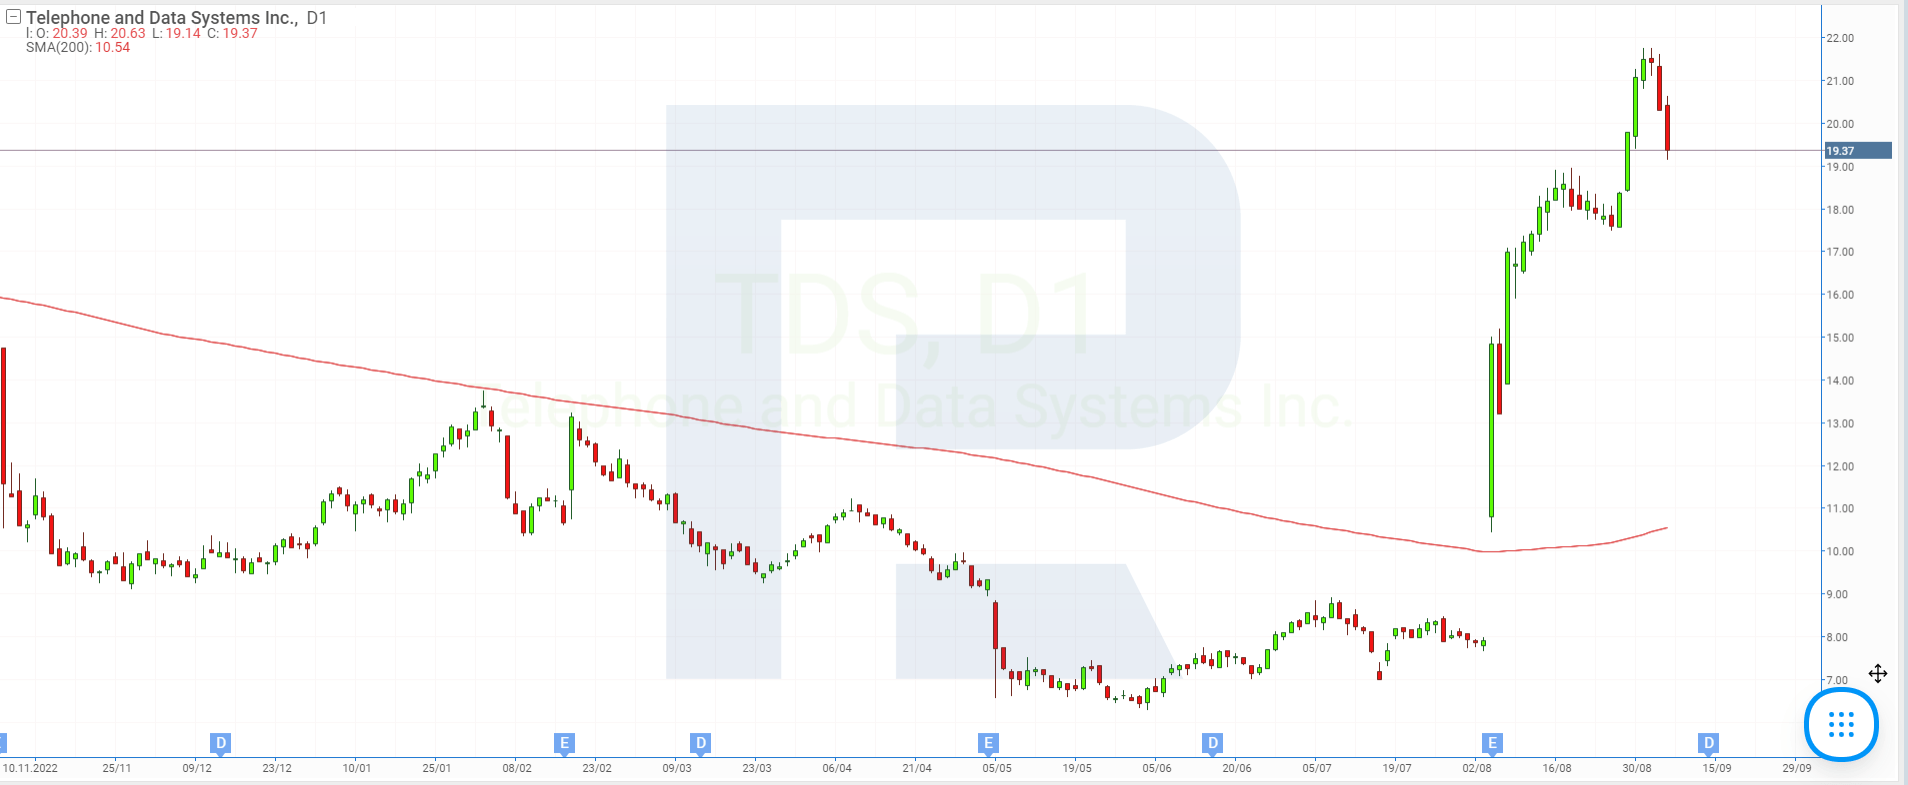 Stock chart of Telephone and Data Systems Inc.